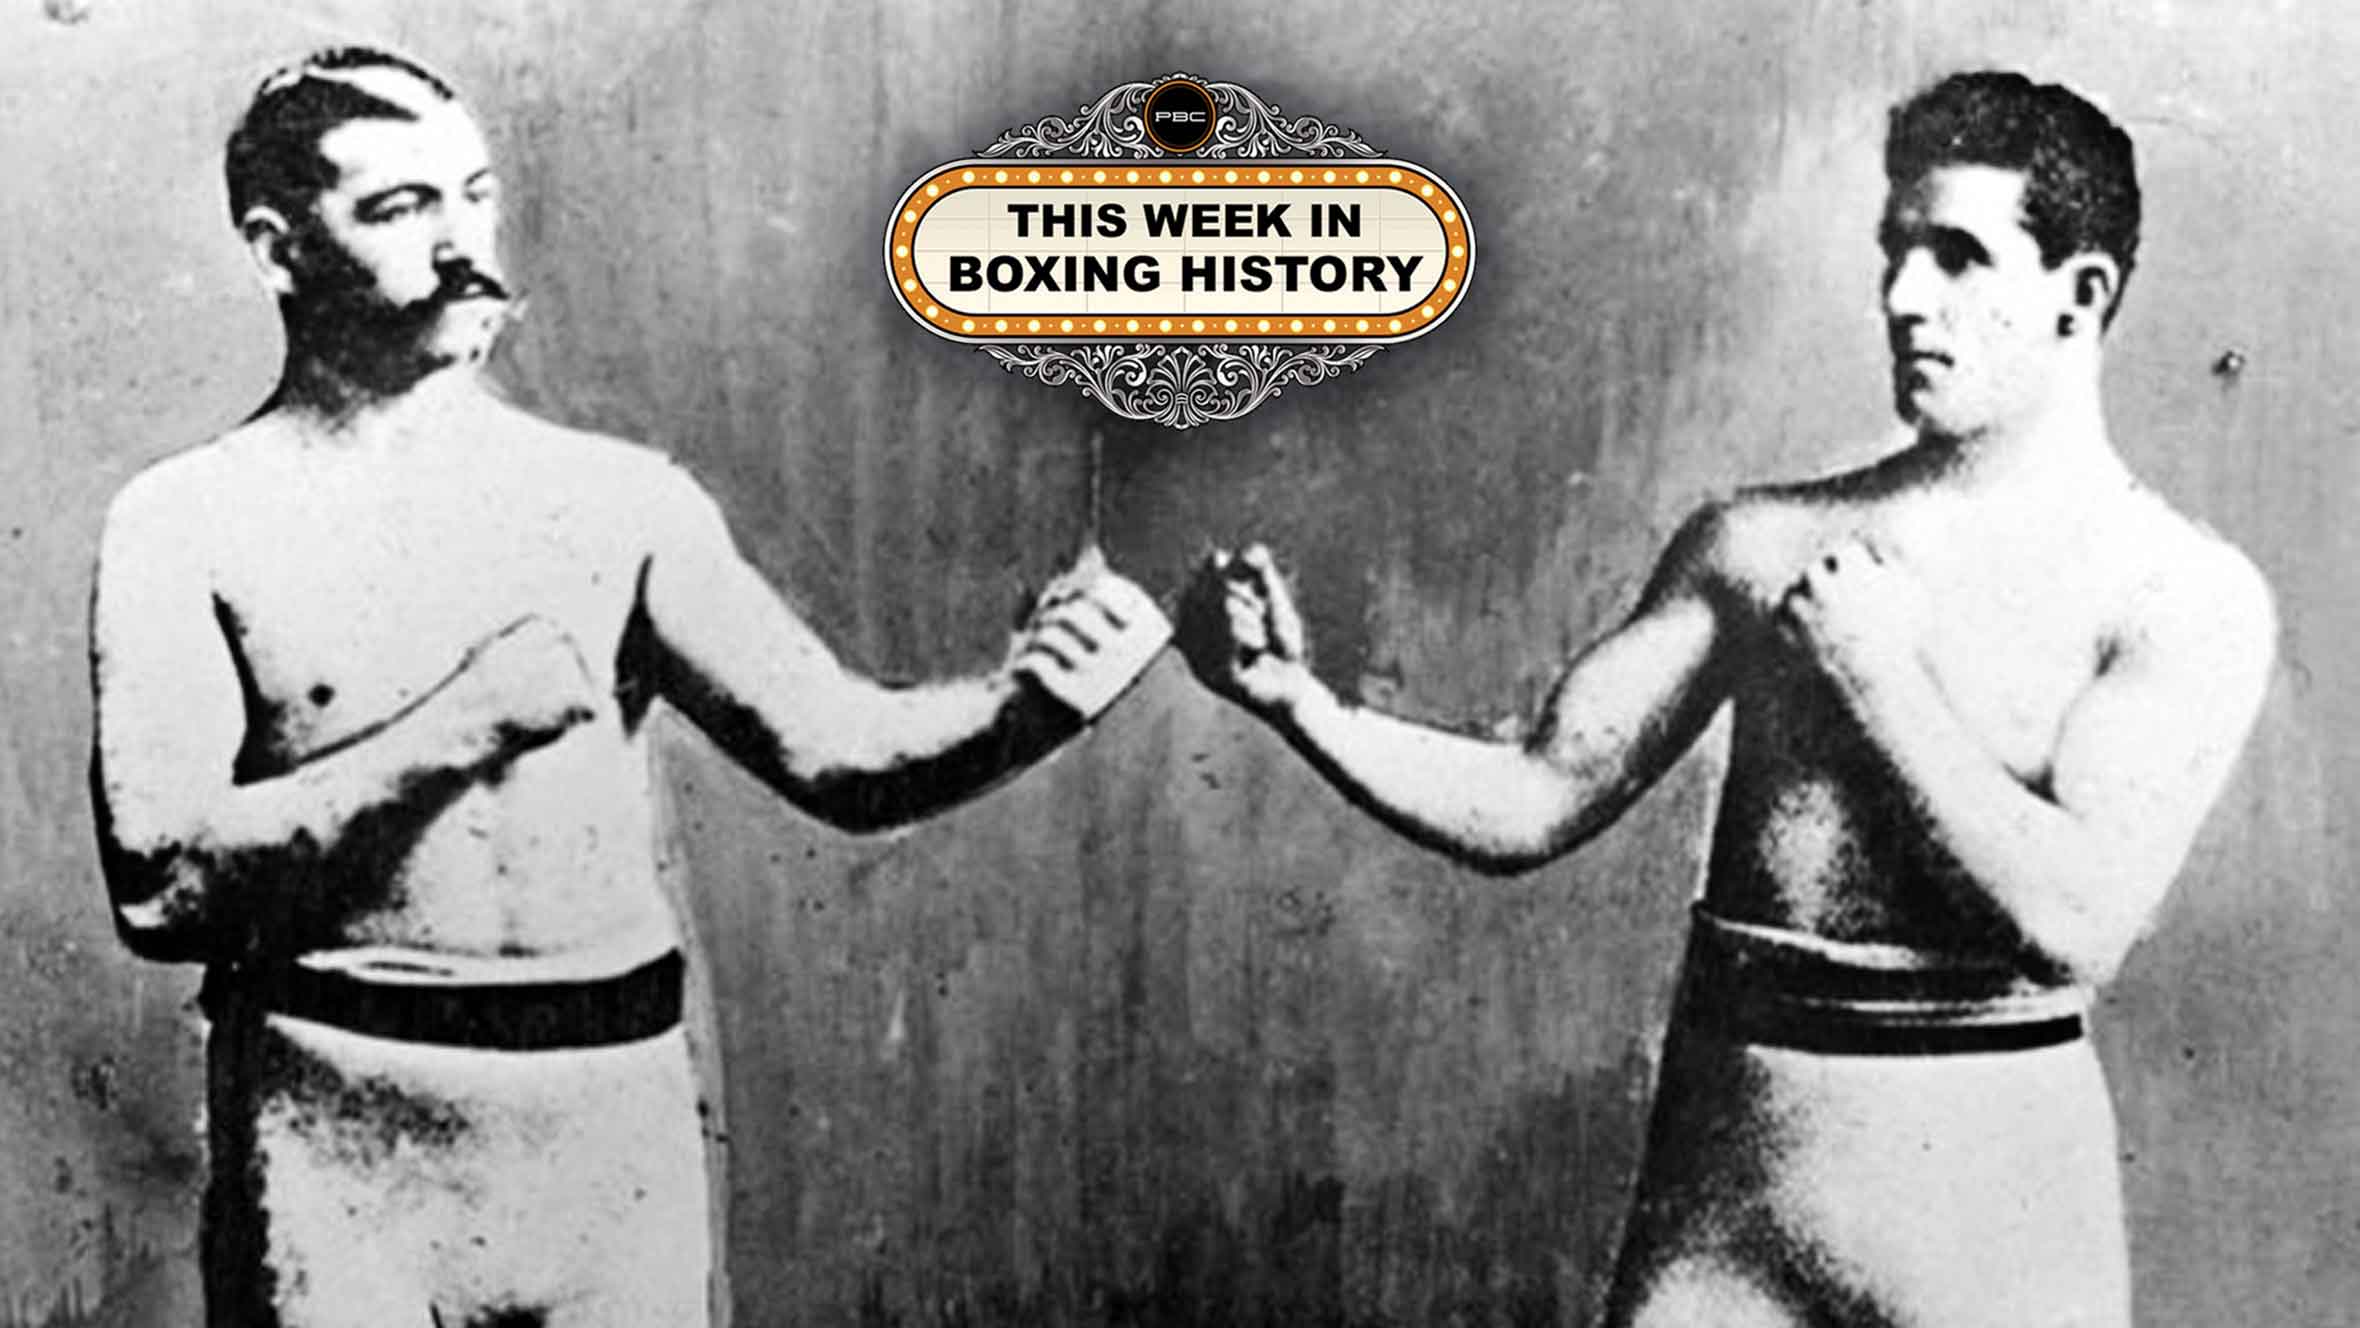 History of Boxing